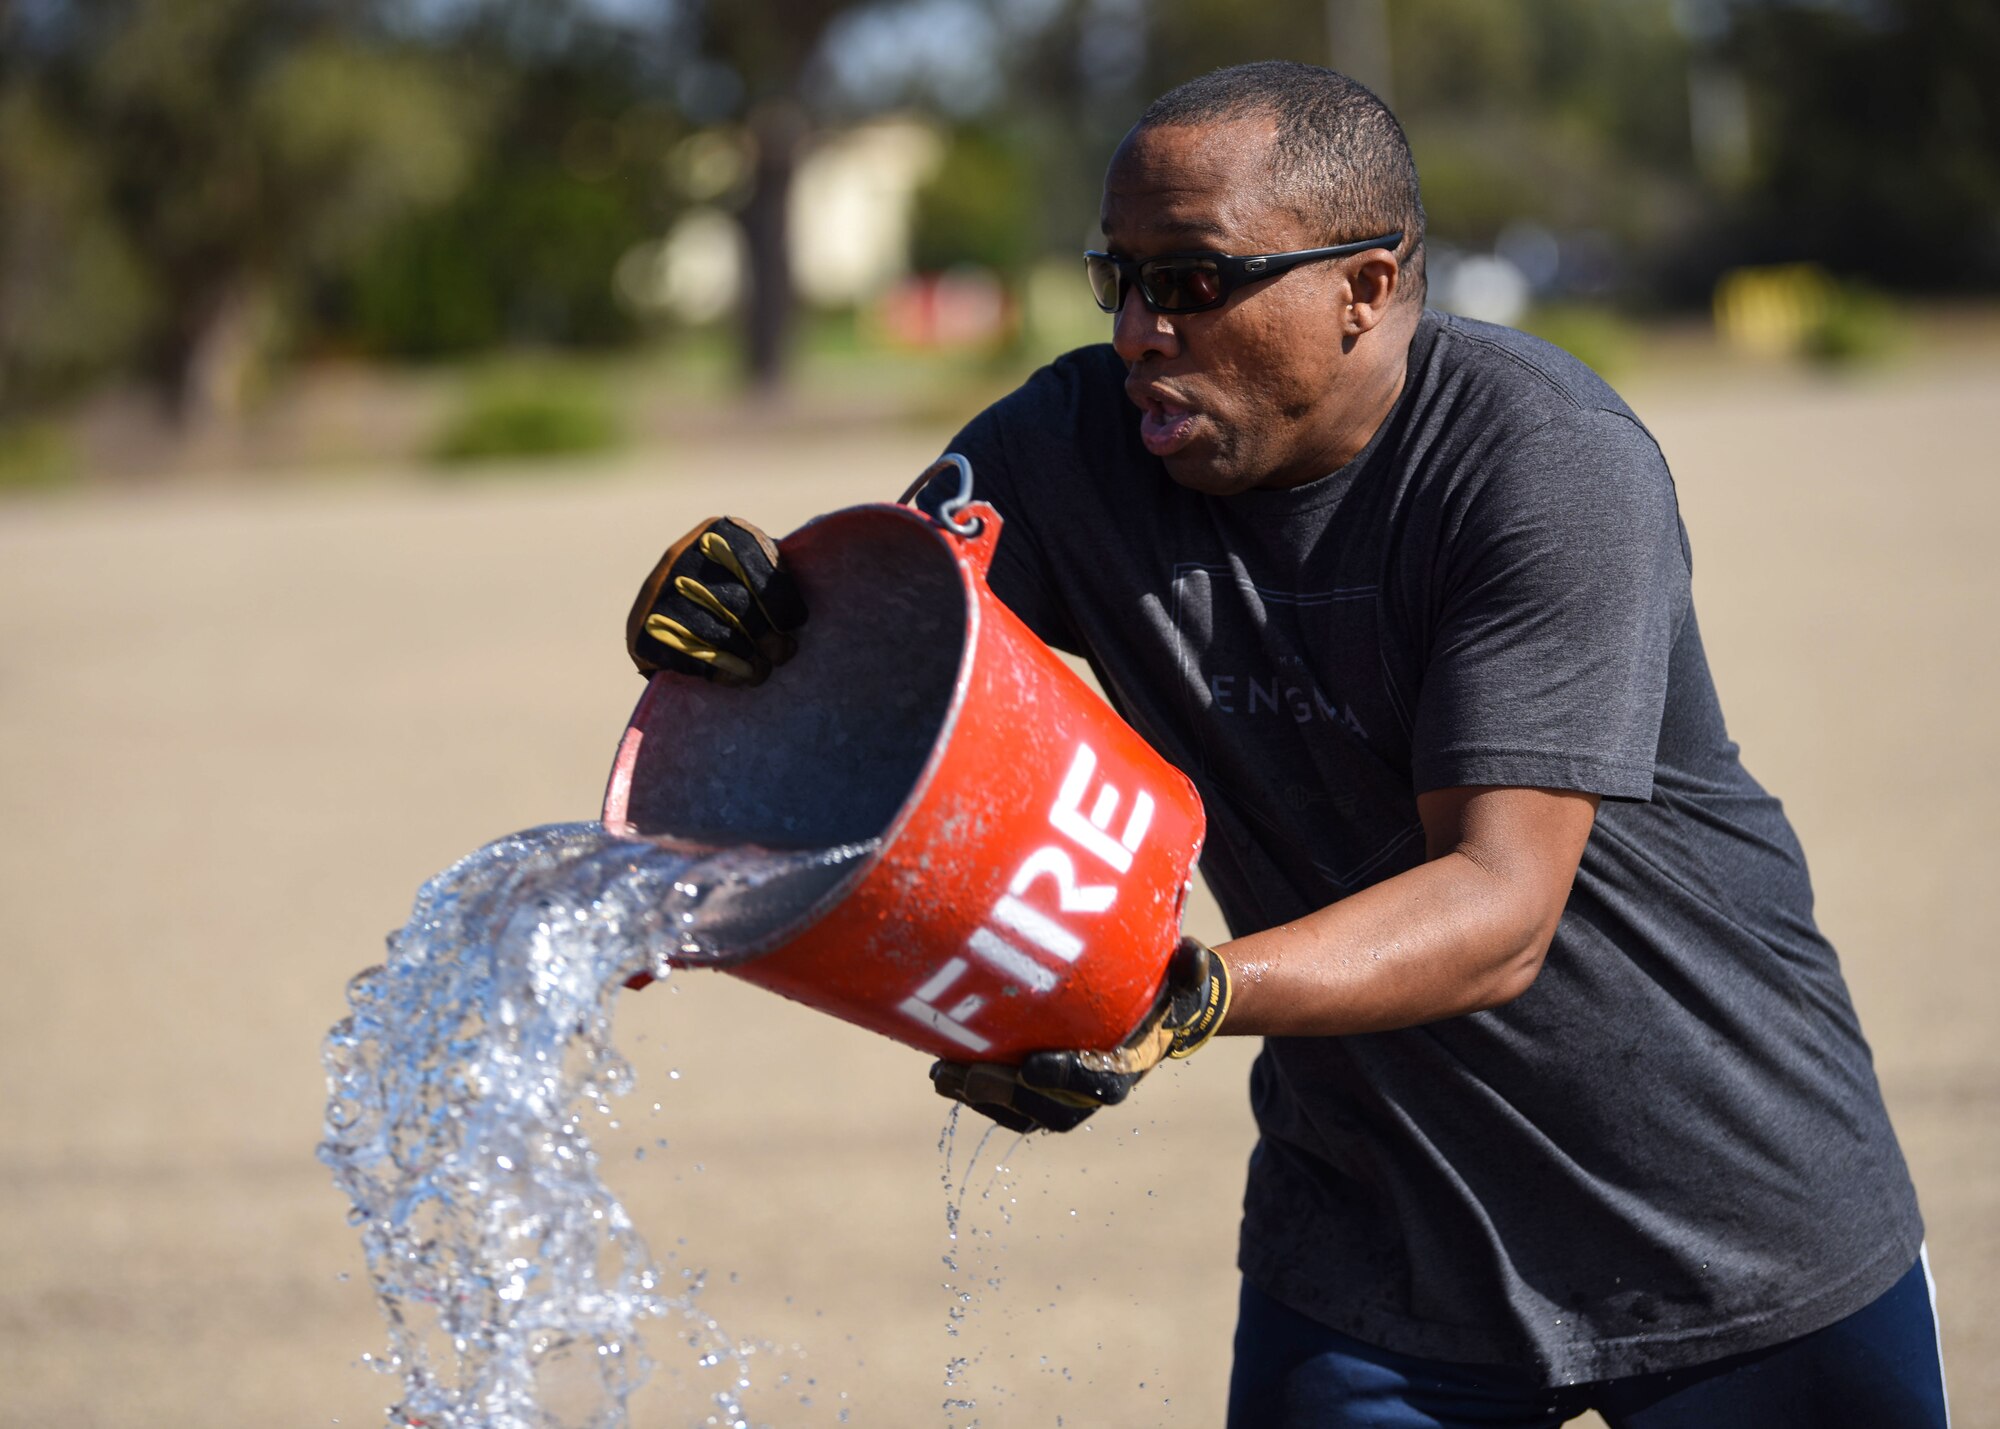 Senior Master Sgt. Curtis Brooks, 4th Space Launch Squadron superintendent, throws water in attempt to put out a house fire during the 2019 Fire Muster Challenge Oct. 10, 2019, at Vandenberg Air Force Base, Calif. More than 100 members from Vandenberg AFB gathered to participate and support this year’s Fire Prevention Week. Out of the 15 teams, a five-member group from 30th Civil Engineer Squadron won the 2019 Fire Muster Challenge. (U.S. Air Force photo by Airman 1st Class Aubree Milks)